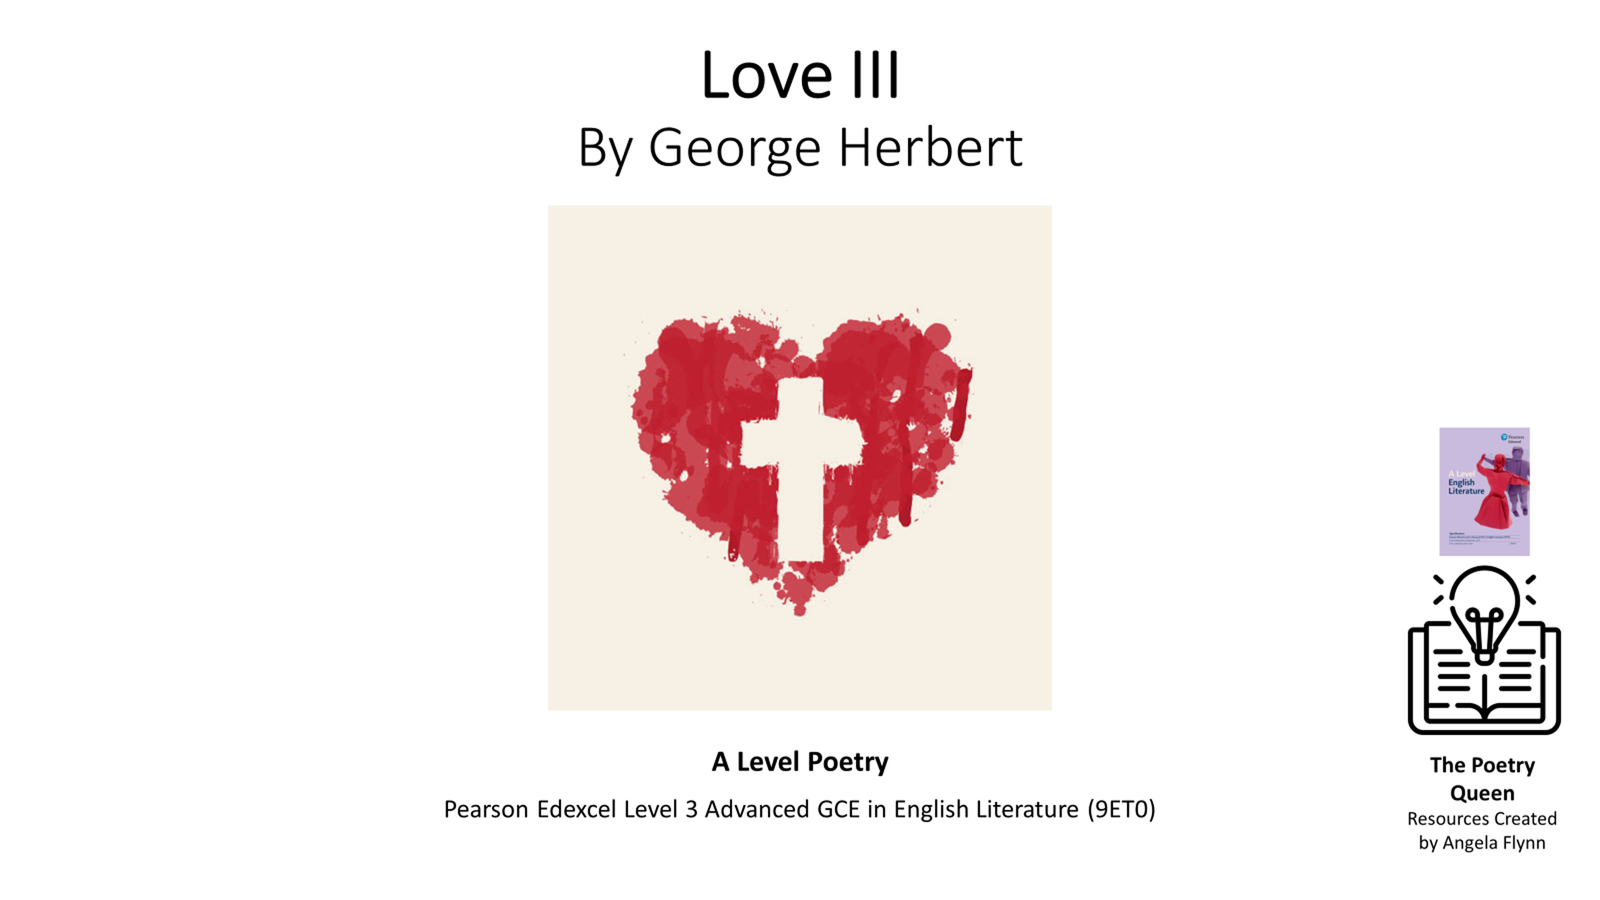 Love III George Herbert poetry illustration for A Level Literature